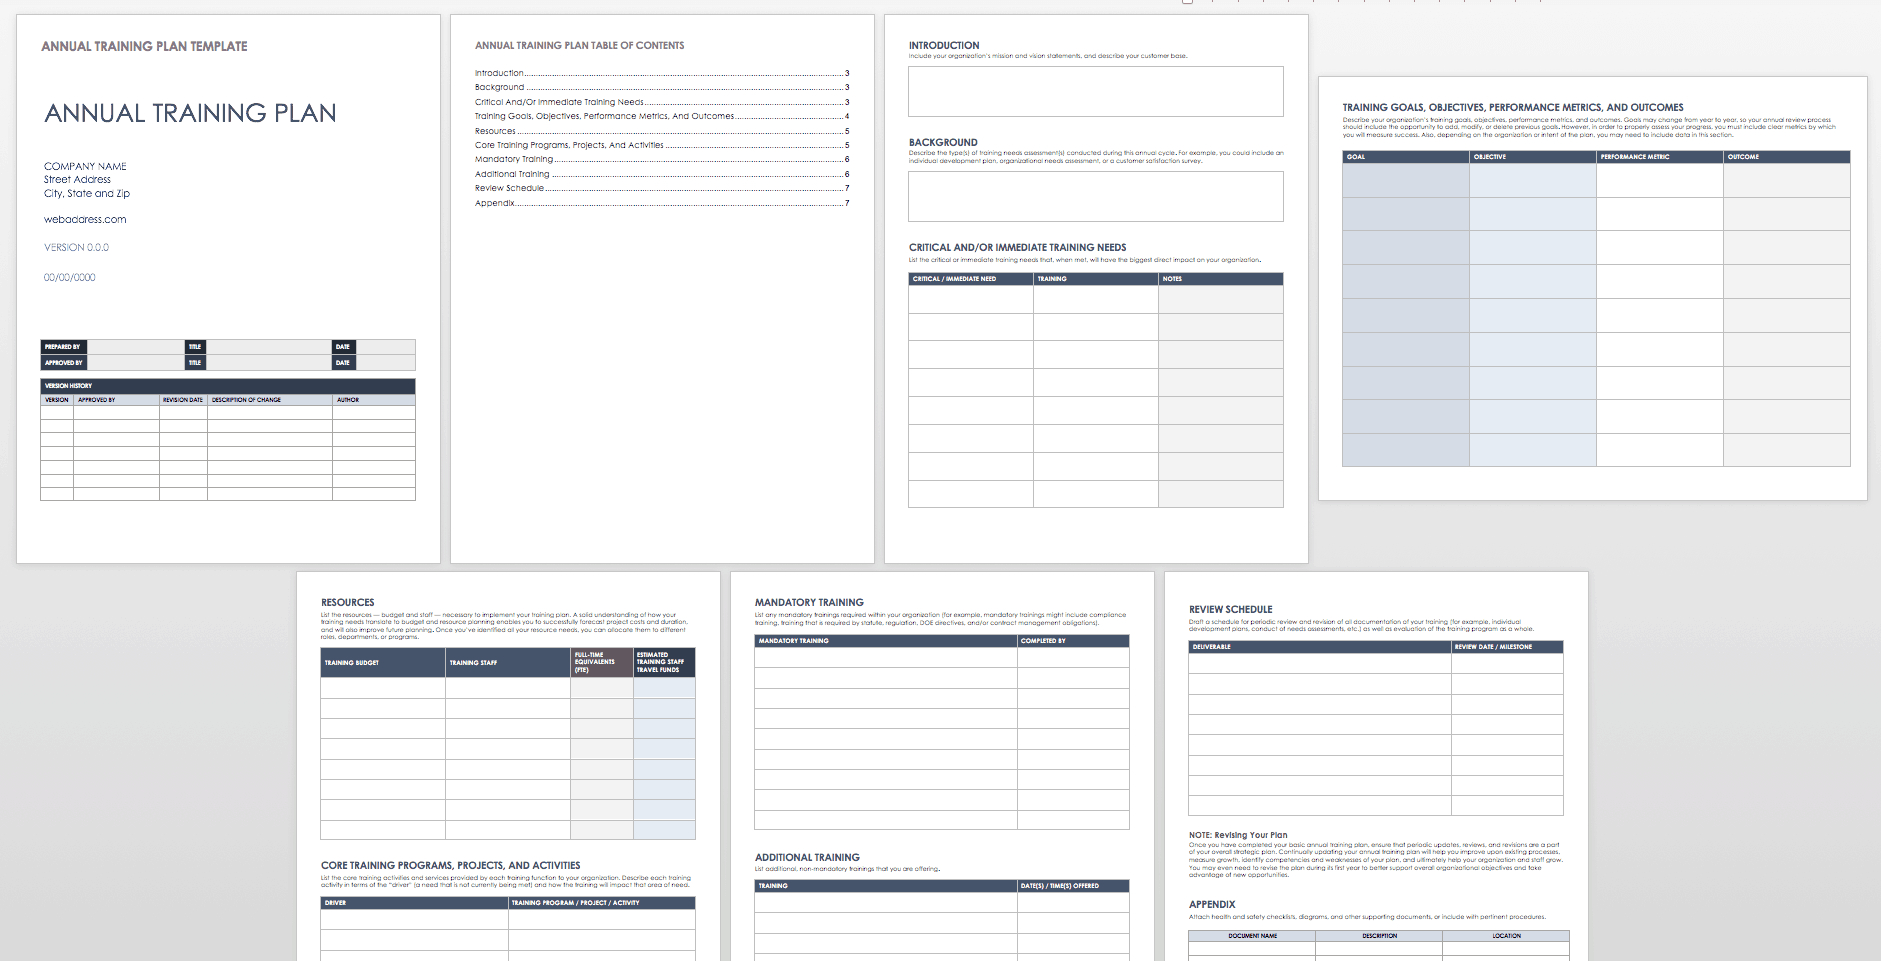 Free Training Plan Templates For Business Use | Smartsheet With Training Documentation Template Word